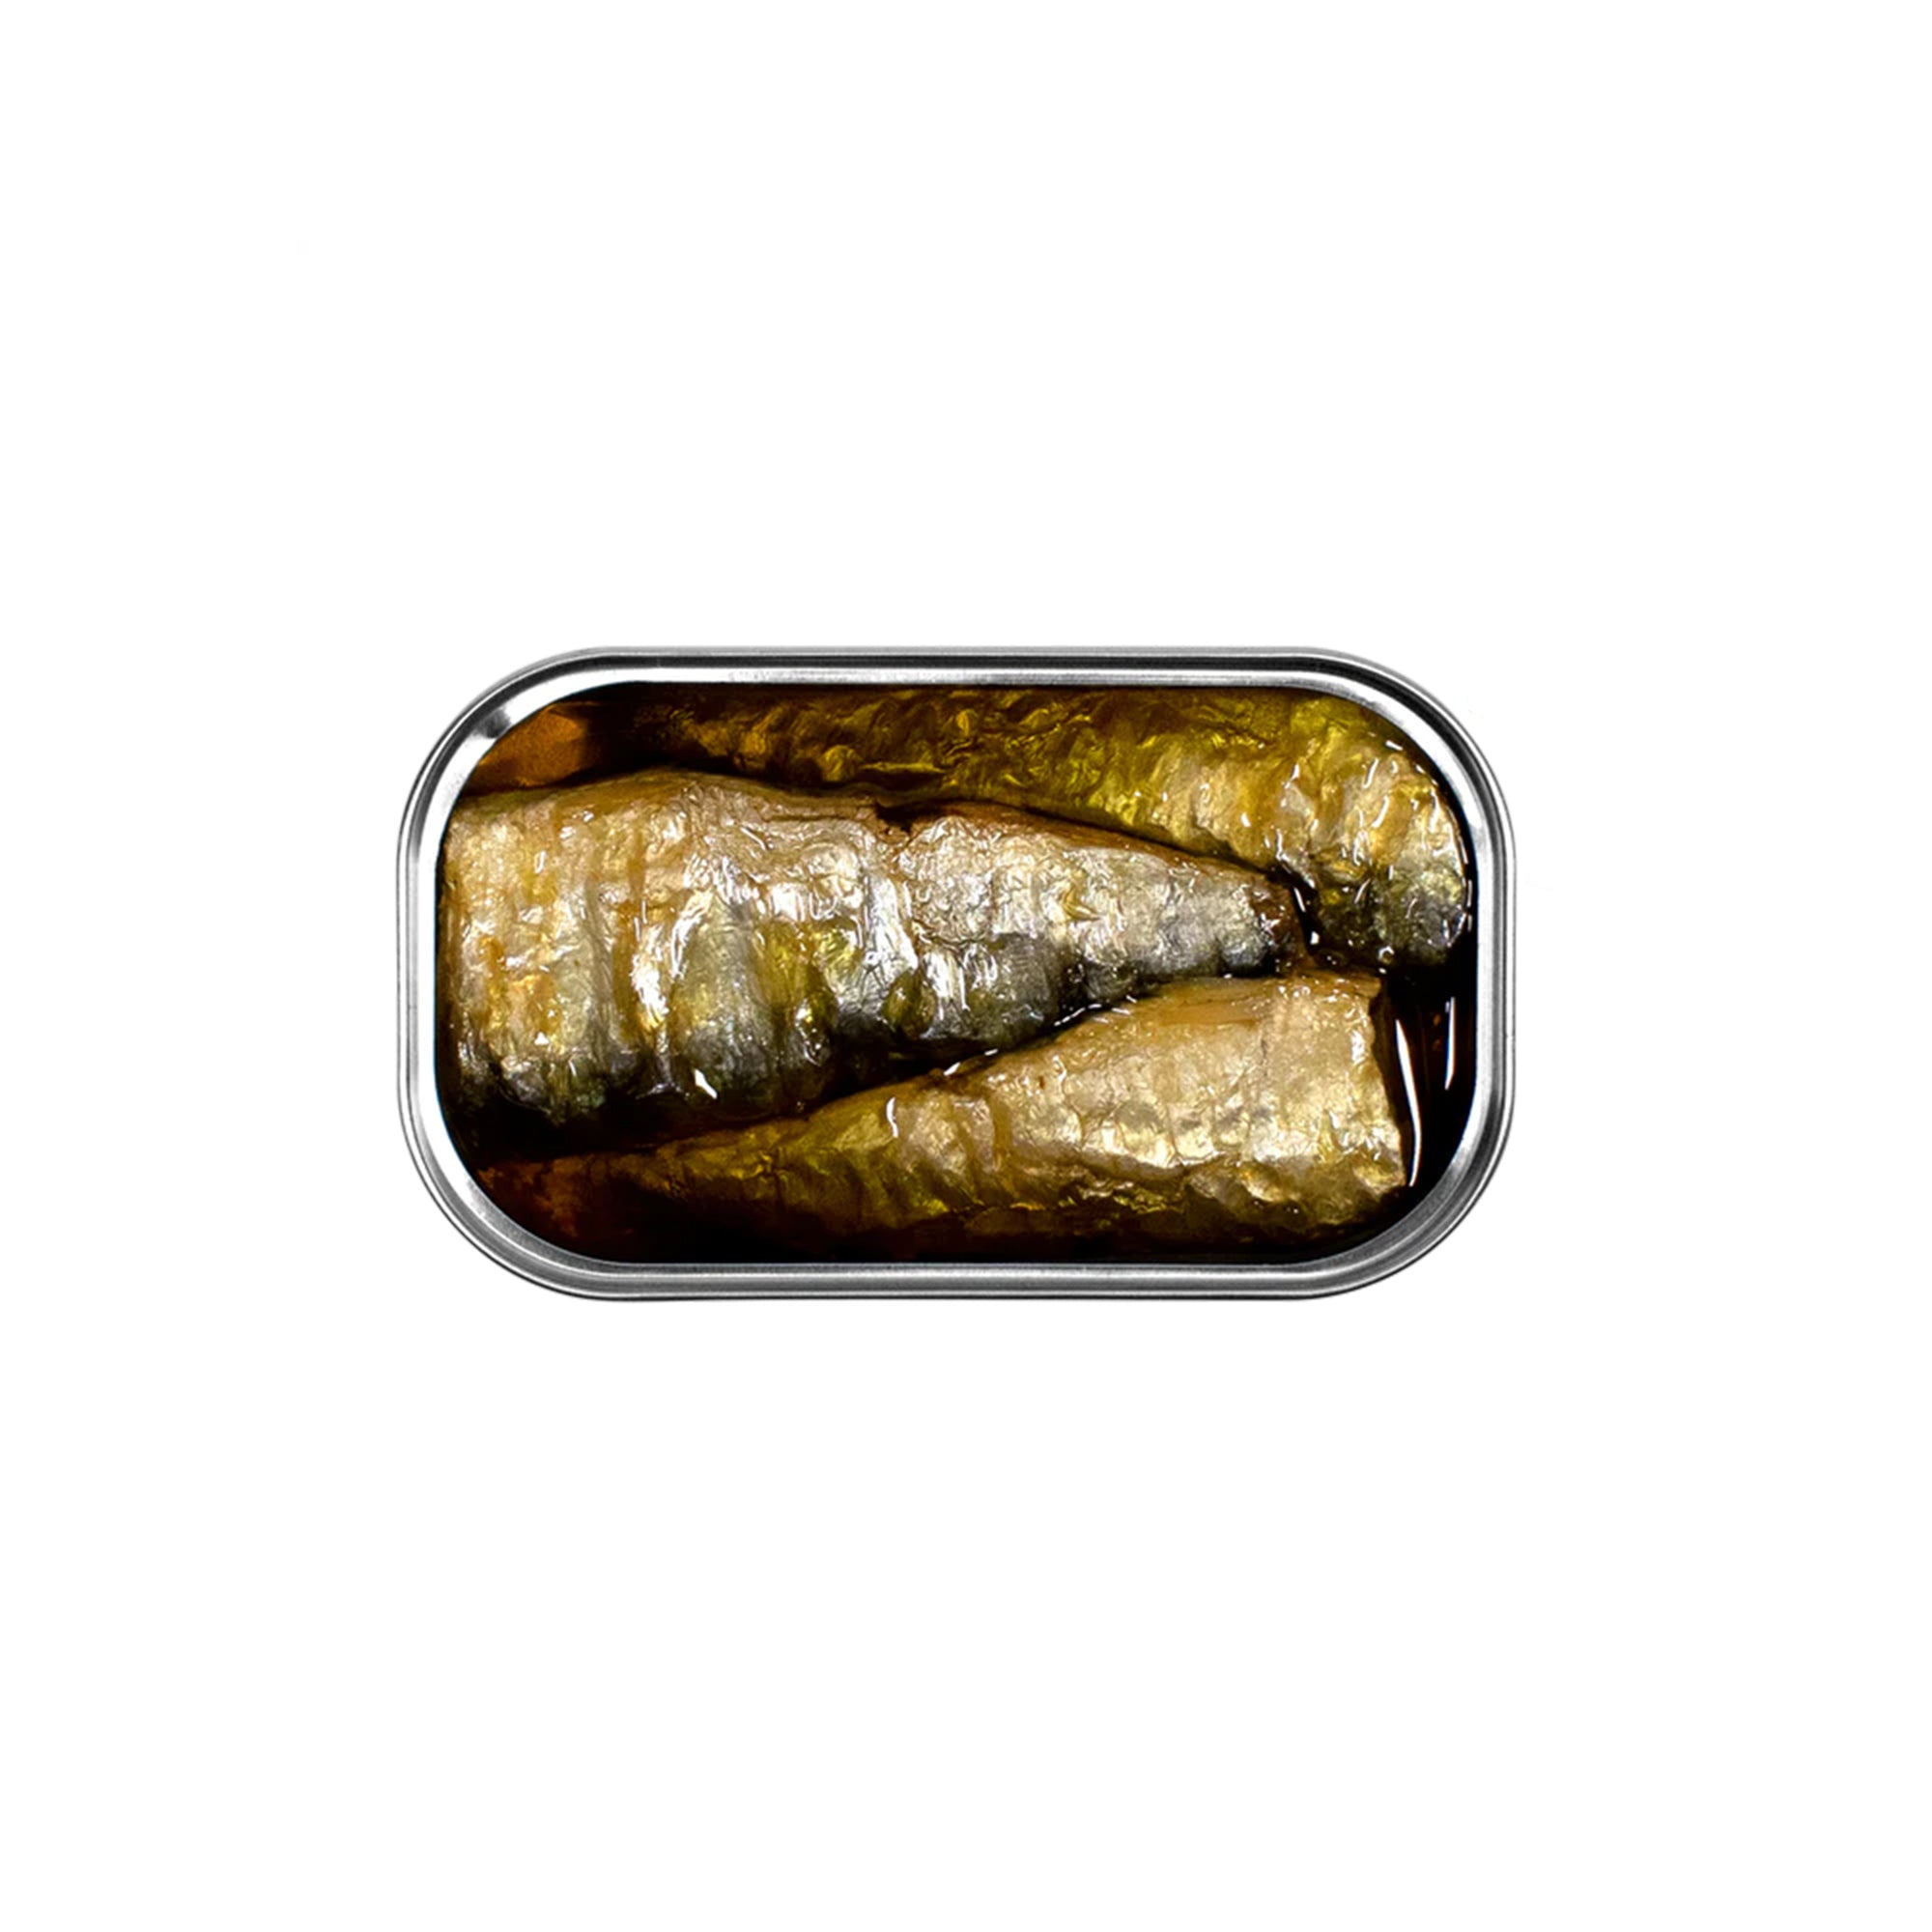 Smoked Sardines in Extra Virgin Olive Oil